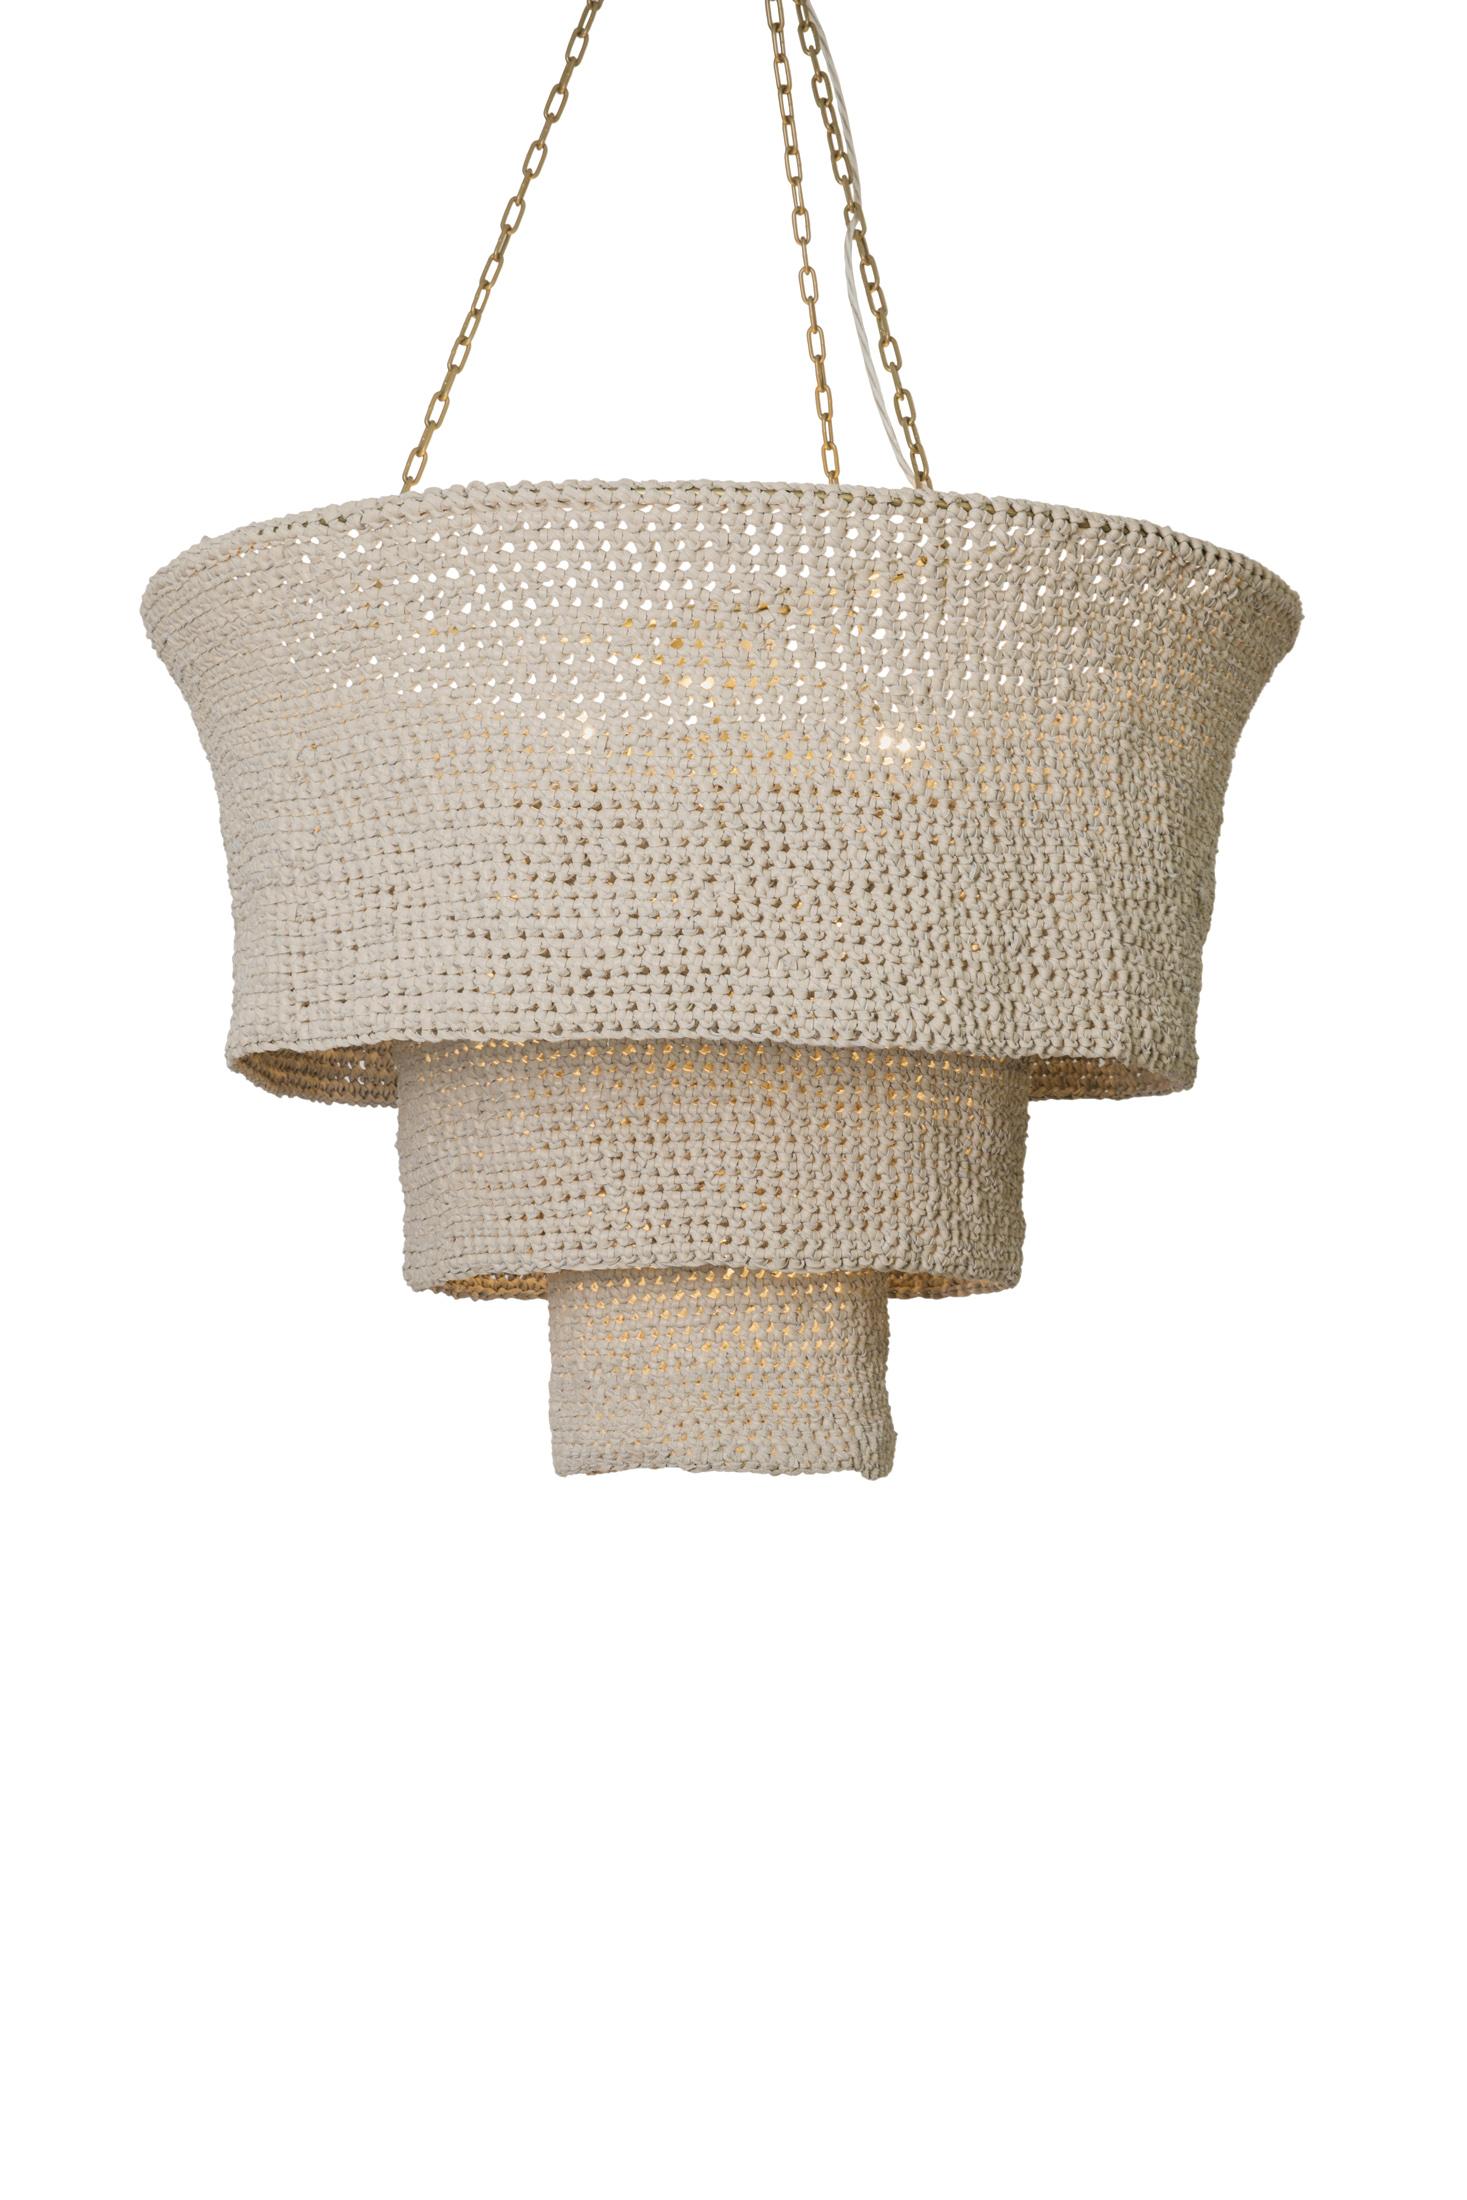 Tathu Crocheted Leather Tiered Chandelier in Cream-Stone Leather